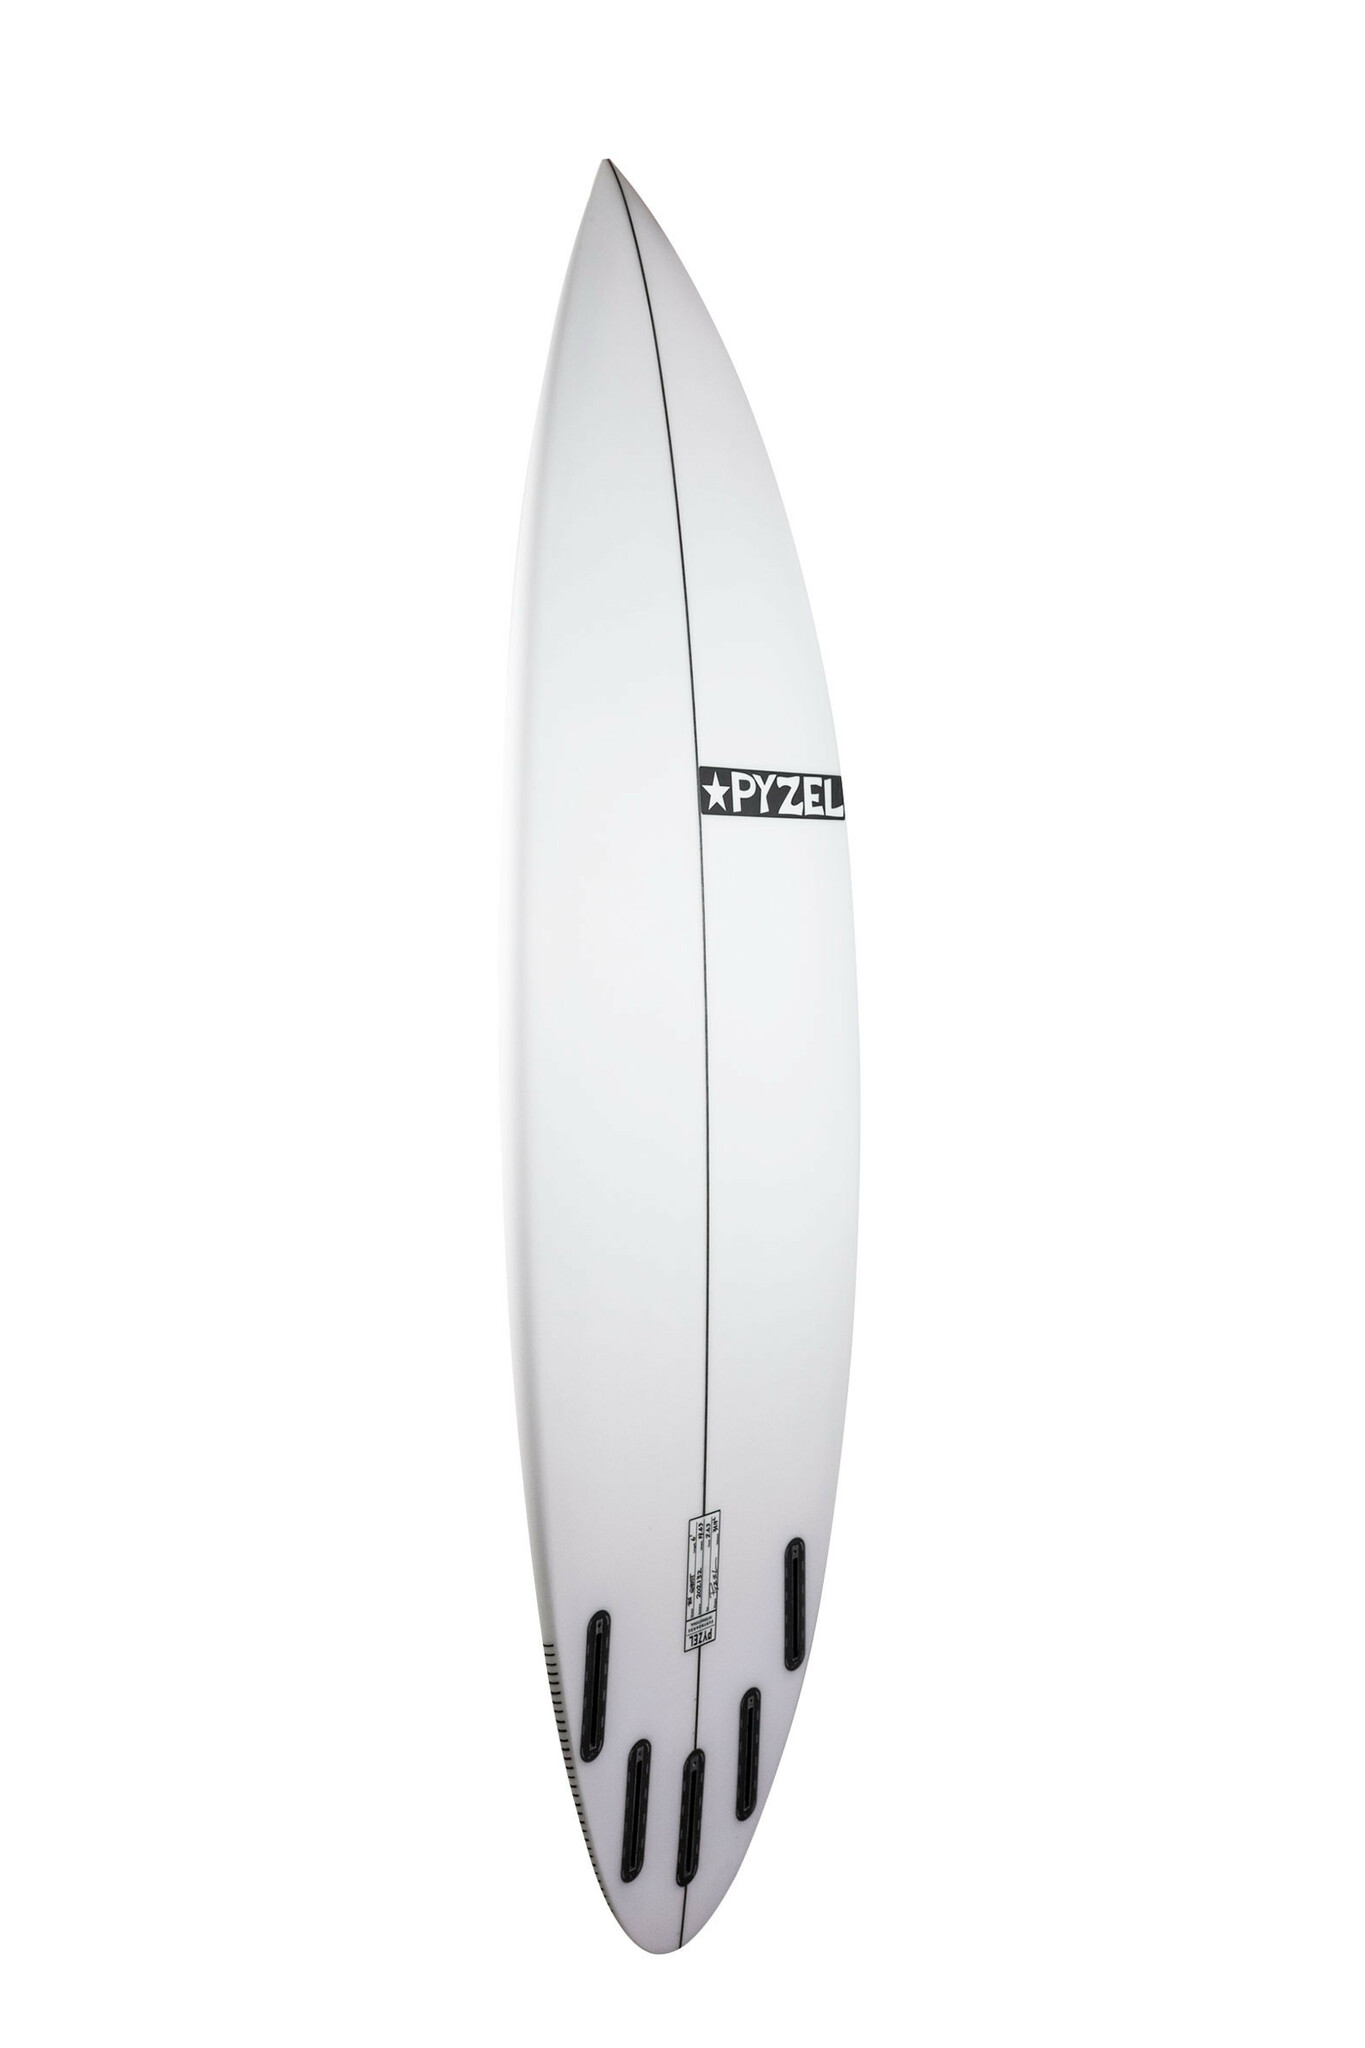 Pyzel Ghost 6'0" Rounded - 29.9L